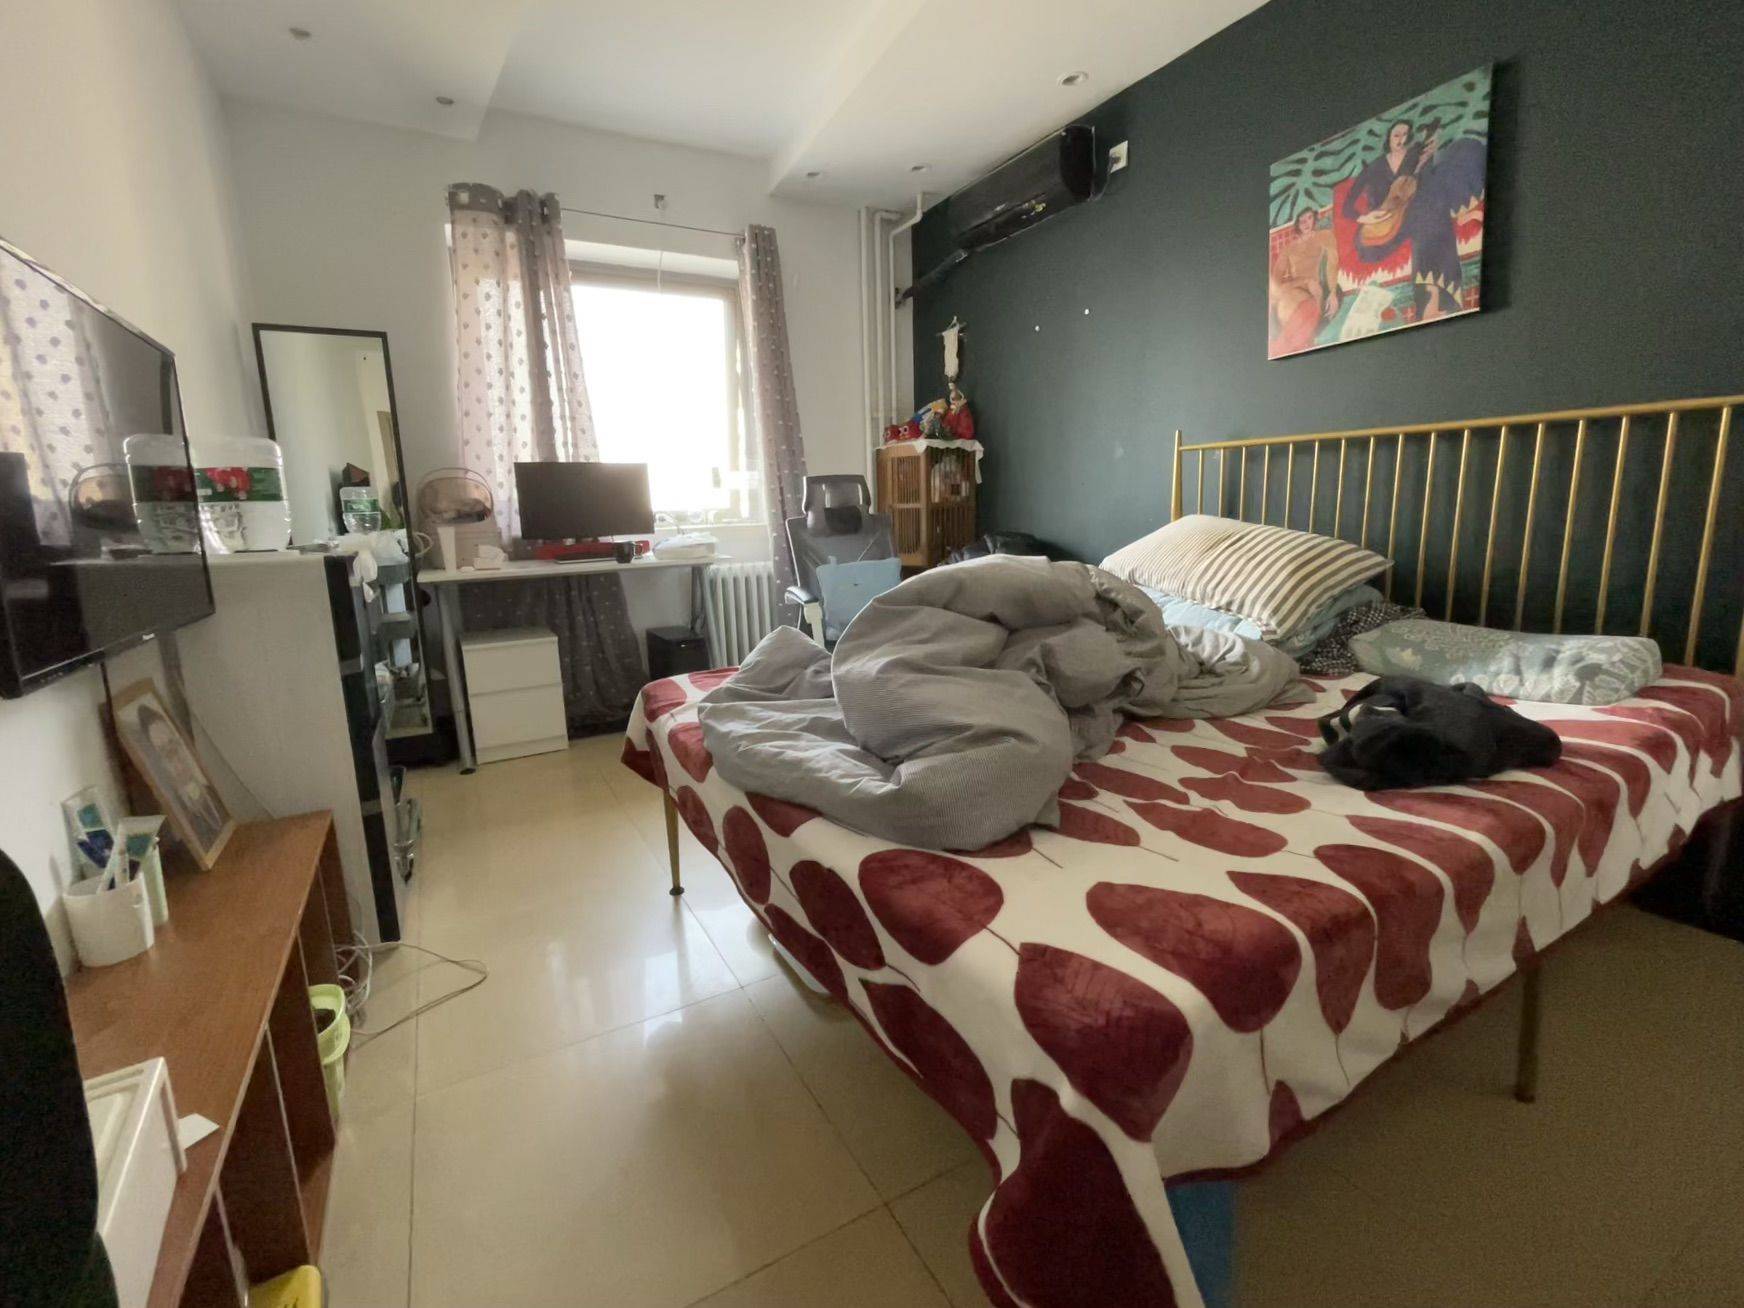 Beijing-Chaoyang-150RMB/Night,转租,Cozy Home,Clean&Comfy,No Gender Limit,Hustle & Bustle